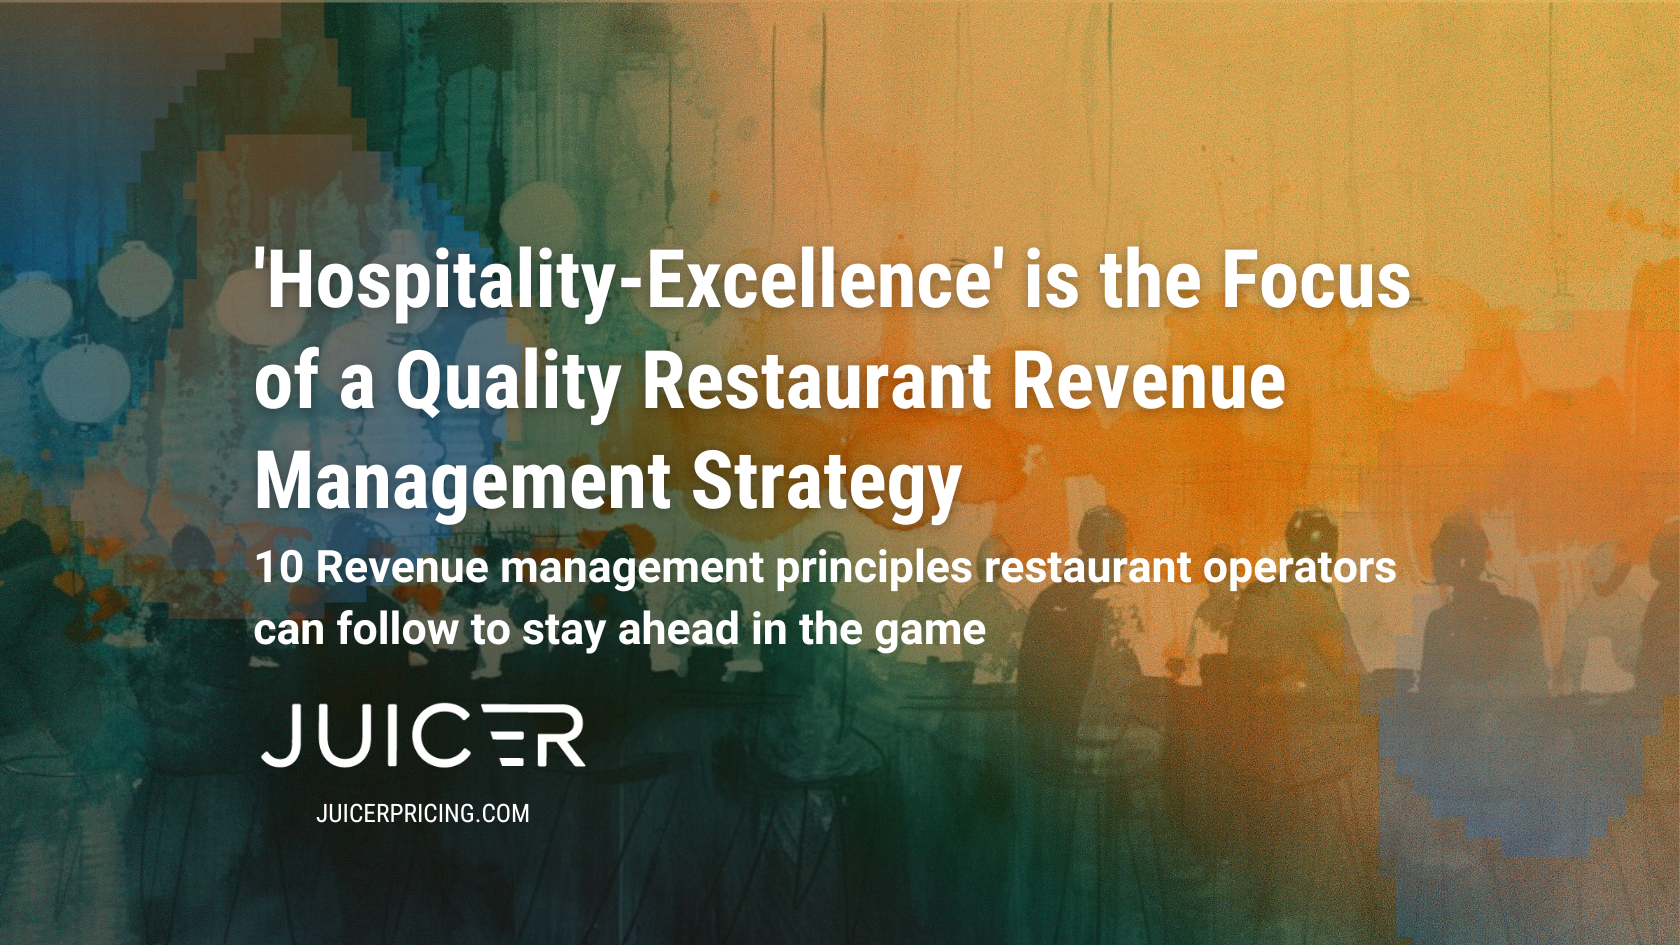 'Hospitality-Excellence' is the Focal Point of a Quality Restaurant Revenue Management Strategy